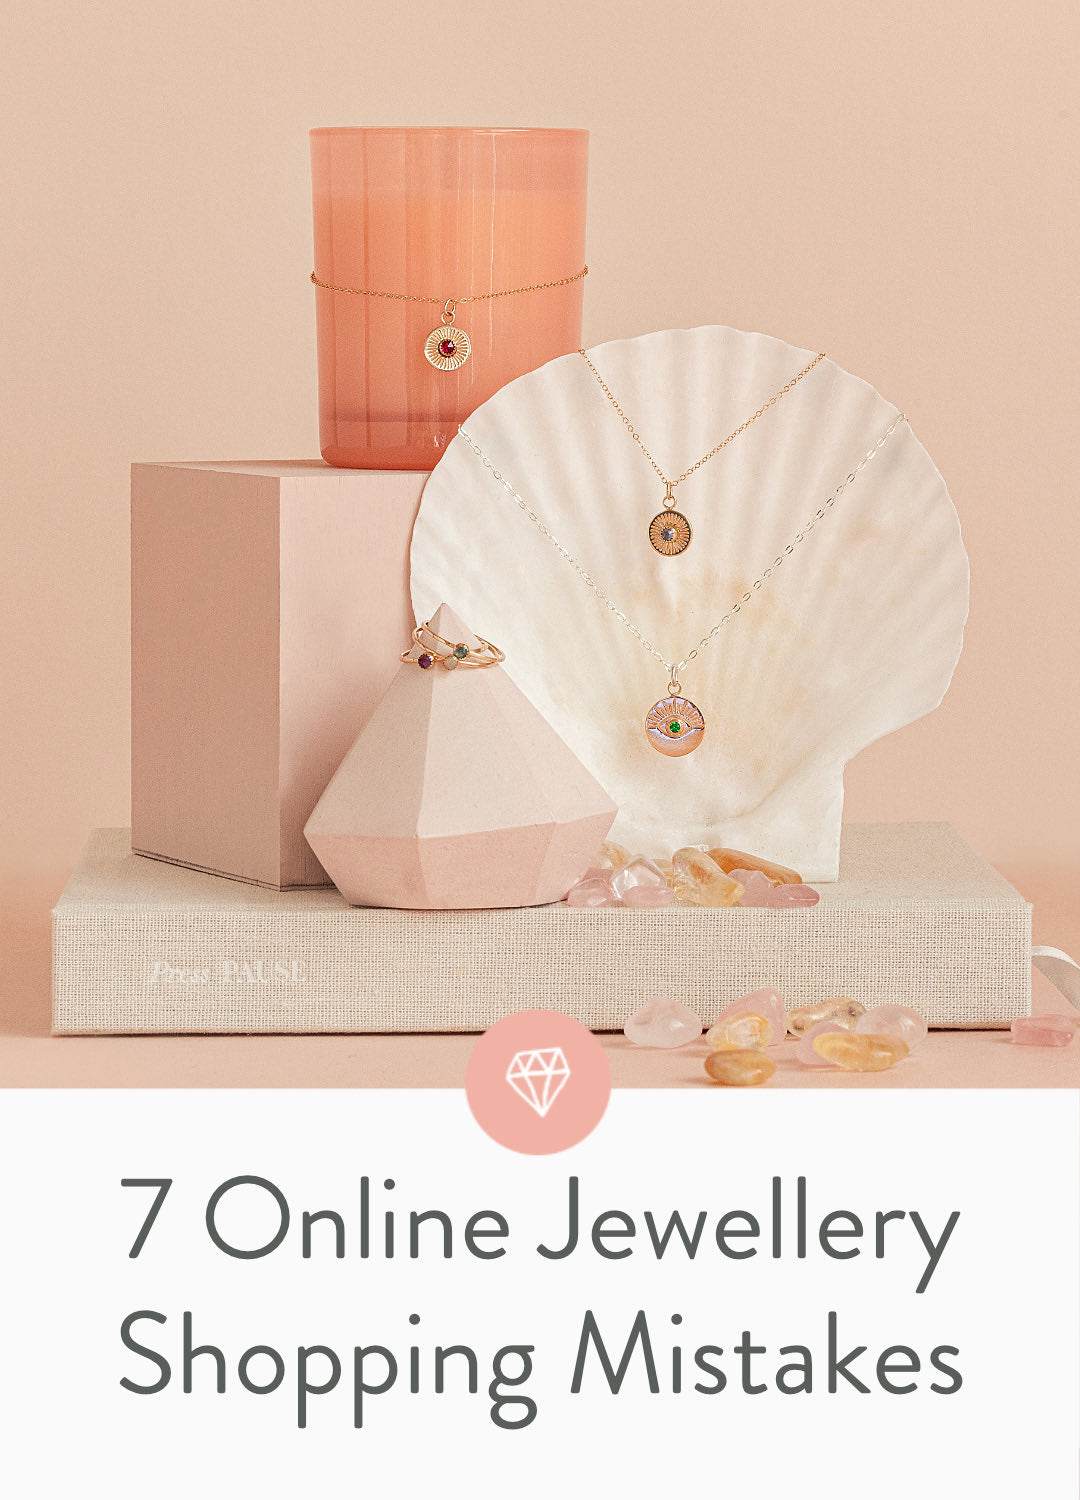 Top 7 Online Jewellery Shopping Mistakes to Avoid